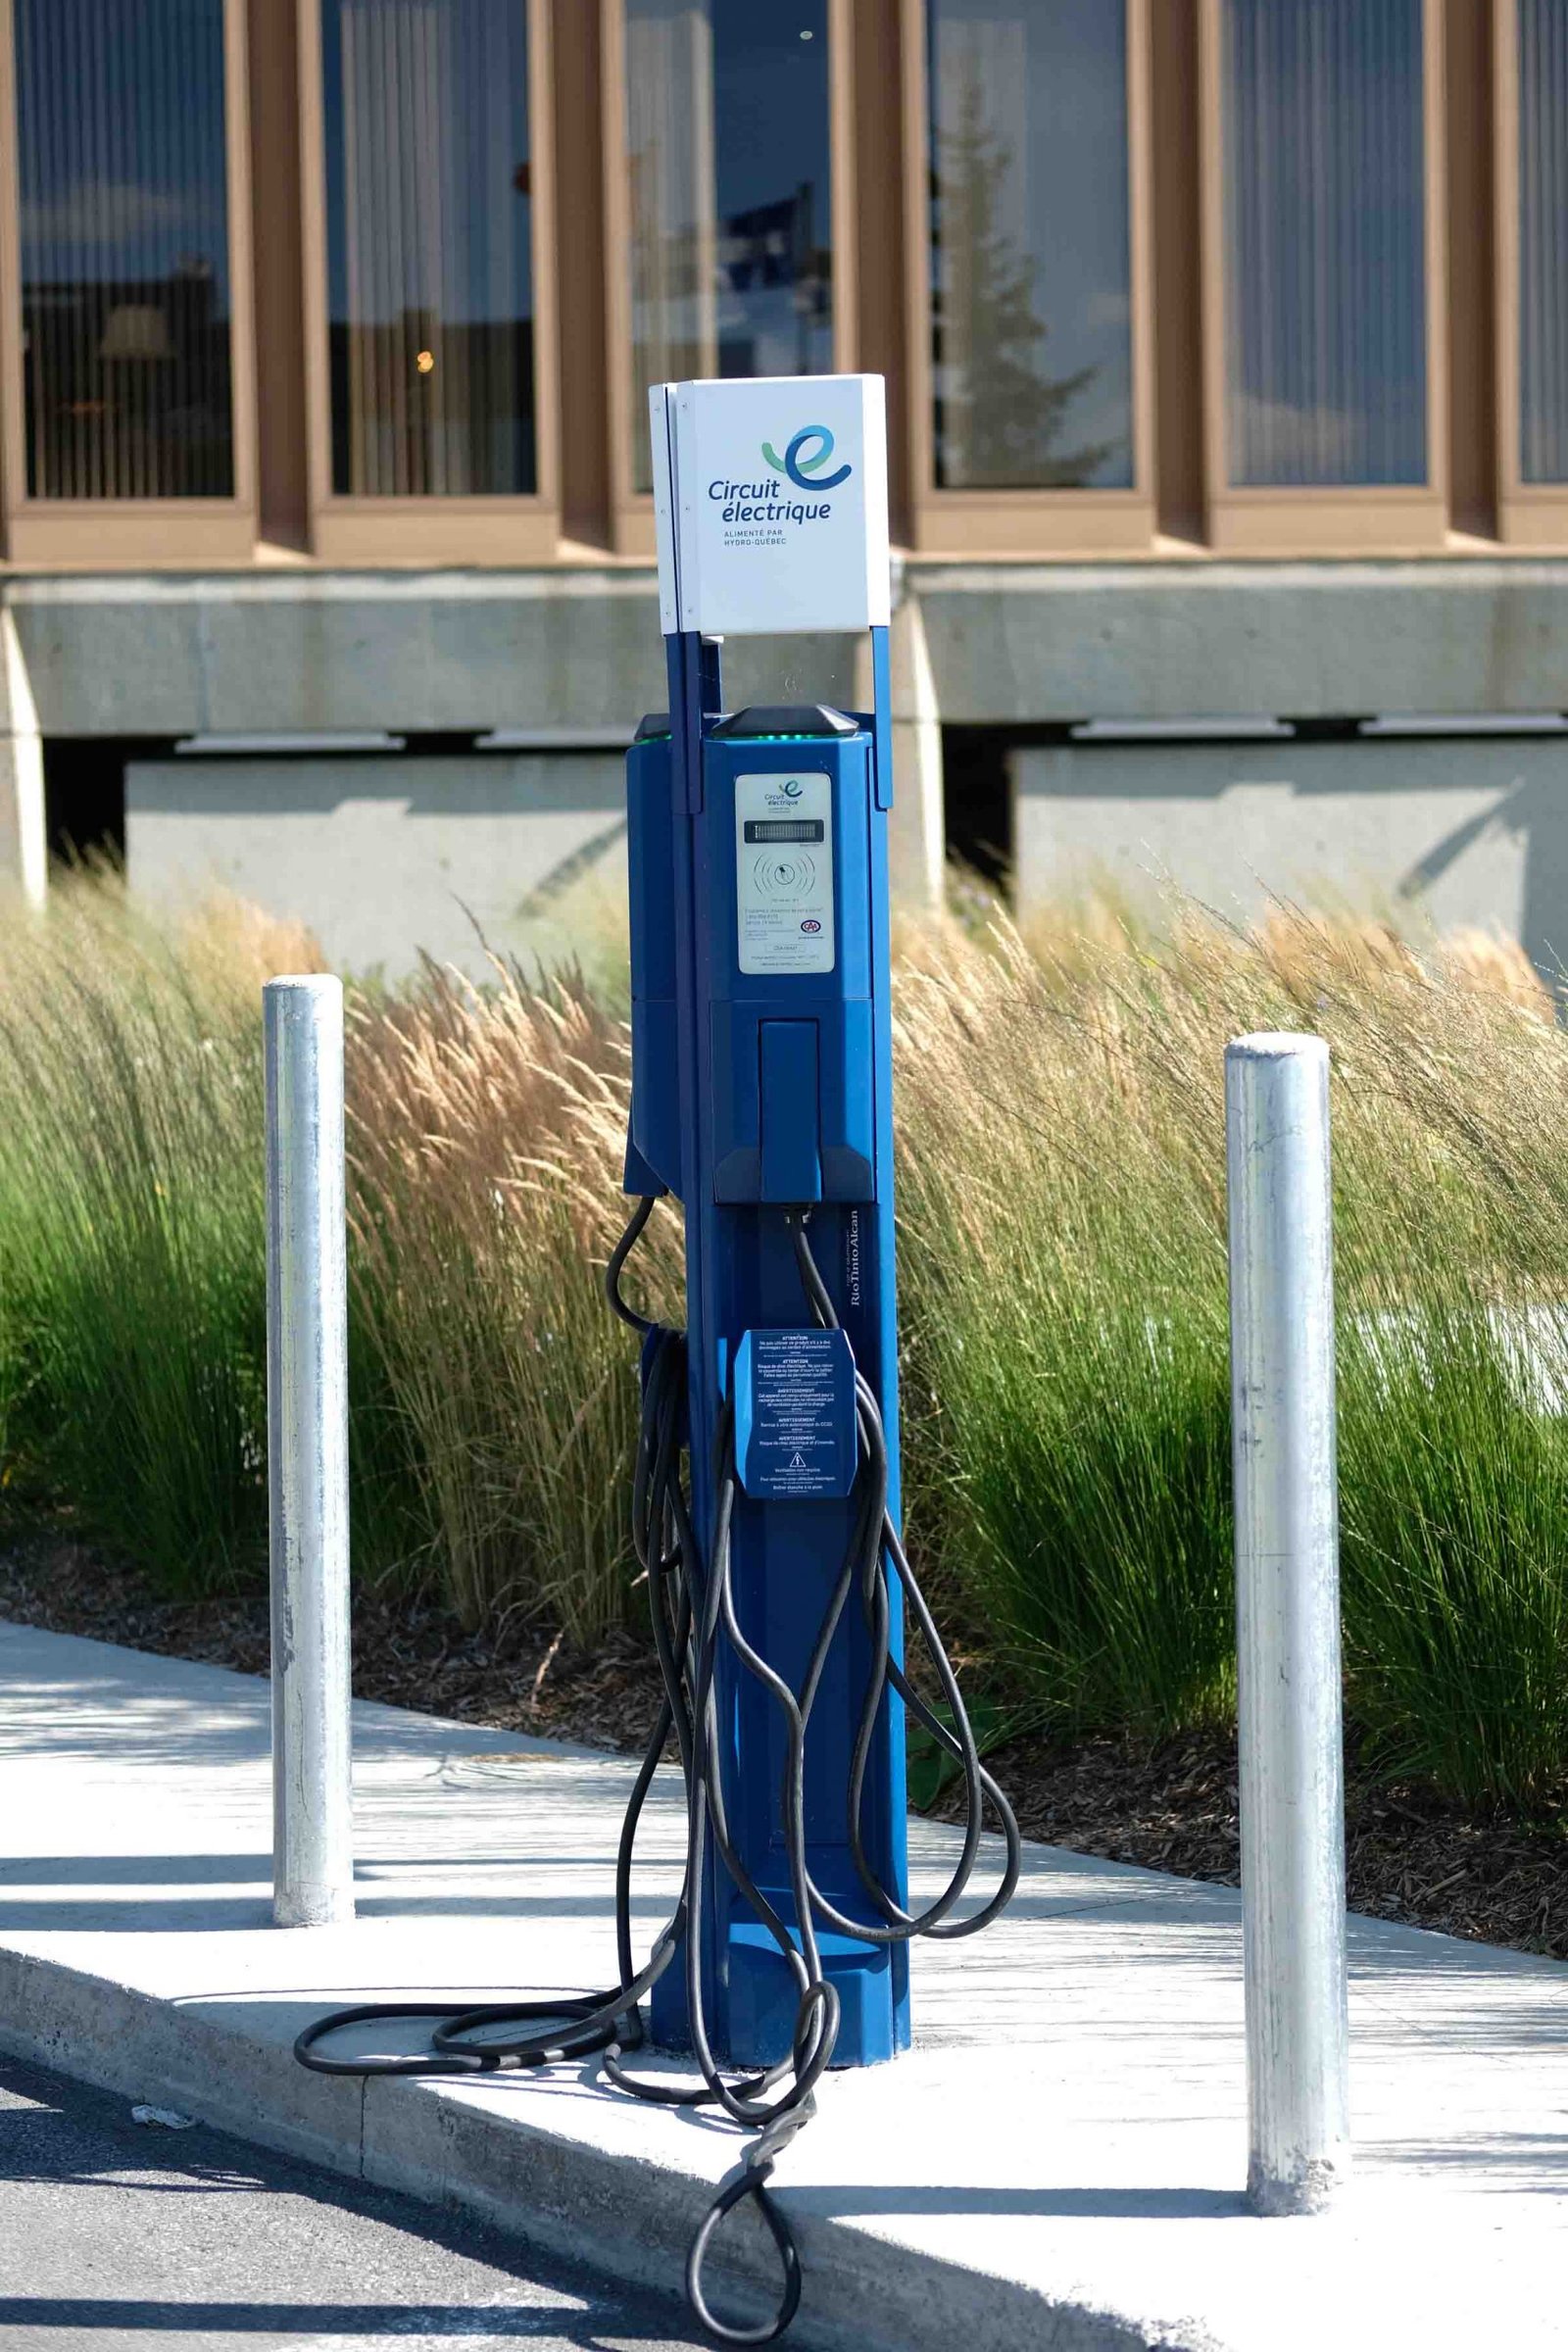 Laval adds electric charging stations to growing network